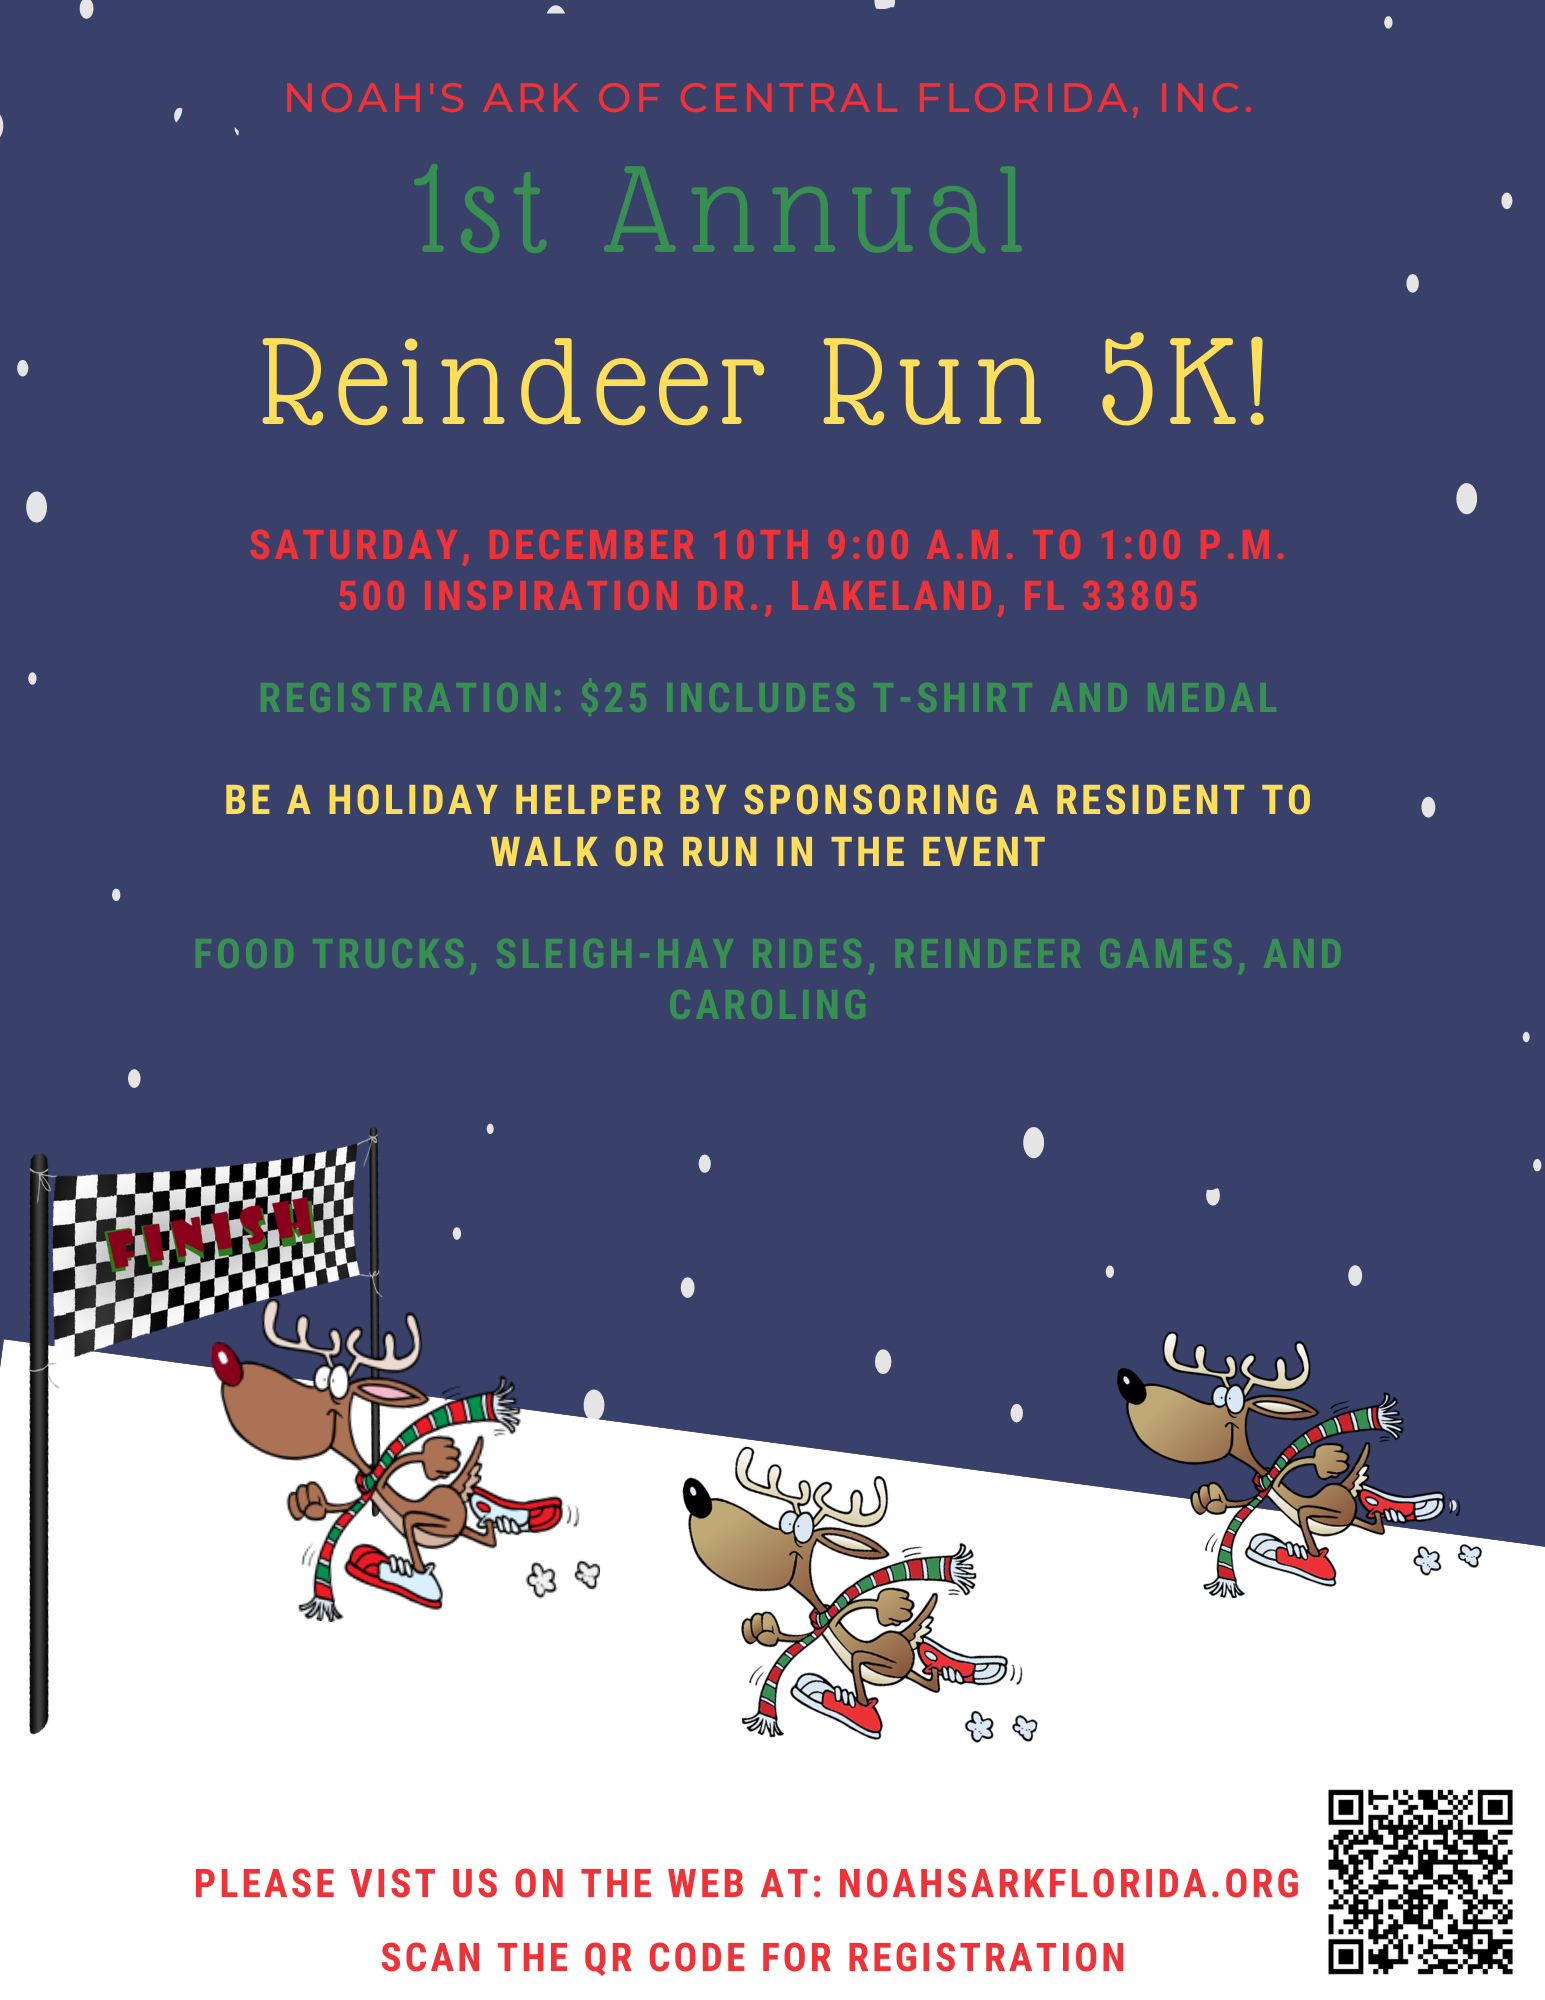 Grab your favorite Antlers & DASH to the finish line at our 1st Annual 5K Reindeer Run. Join in all the reindeer games, sleigh rides & food trucks at Noah's Ark of Central Florida!! Registration is $25 per runner/walker, you can sponsor a resident or become a 5K Reindeer Run Sponsor. Scan the QR Code or follow the link to register online prior to the event. We look forward to seeing you Blitzen across the finish line!